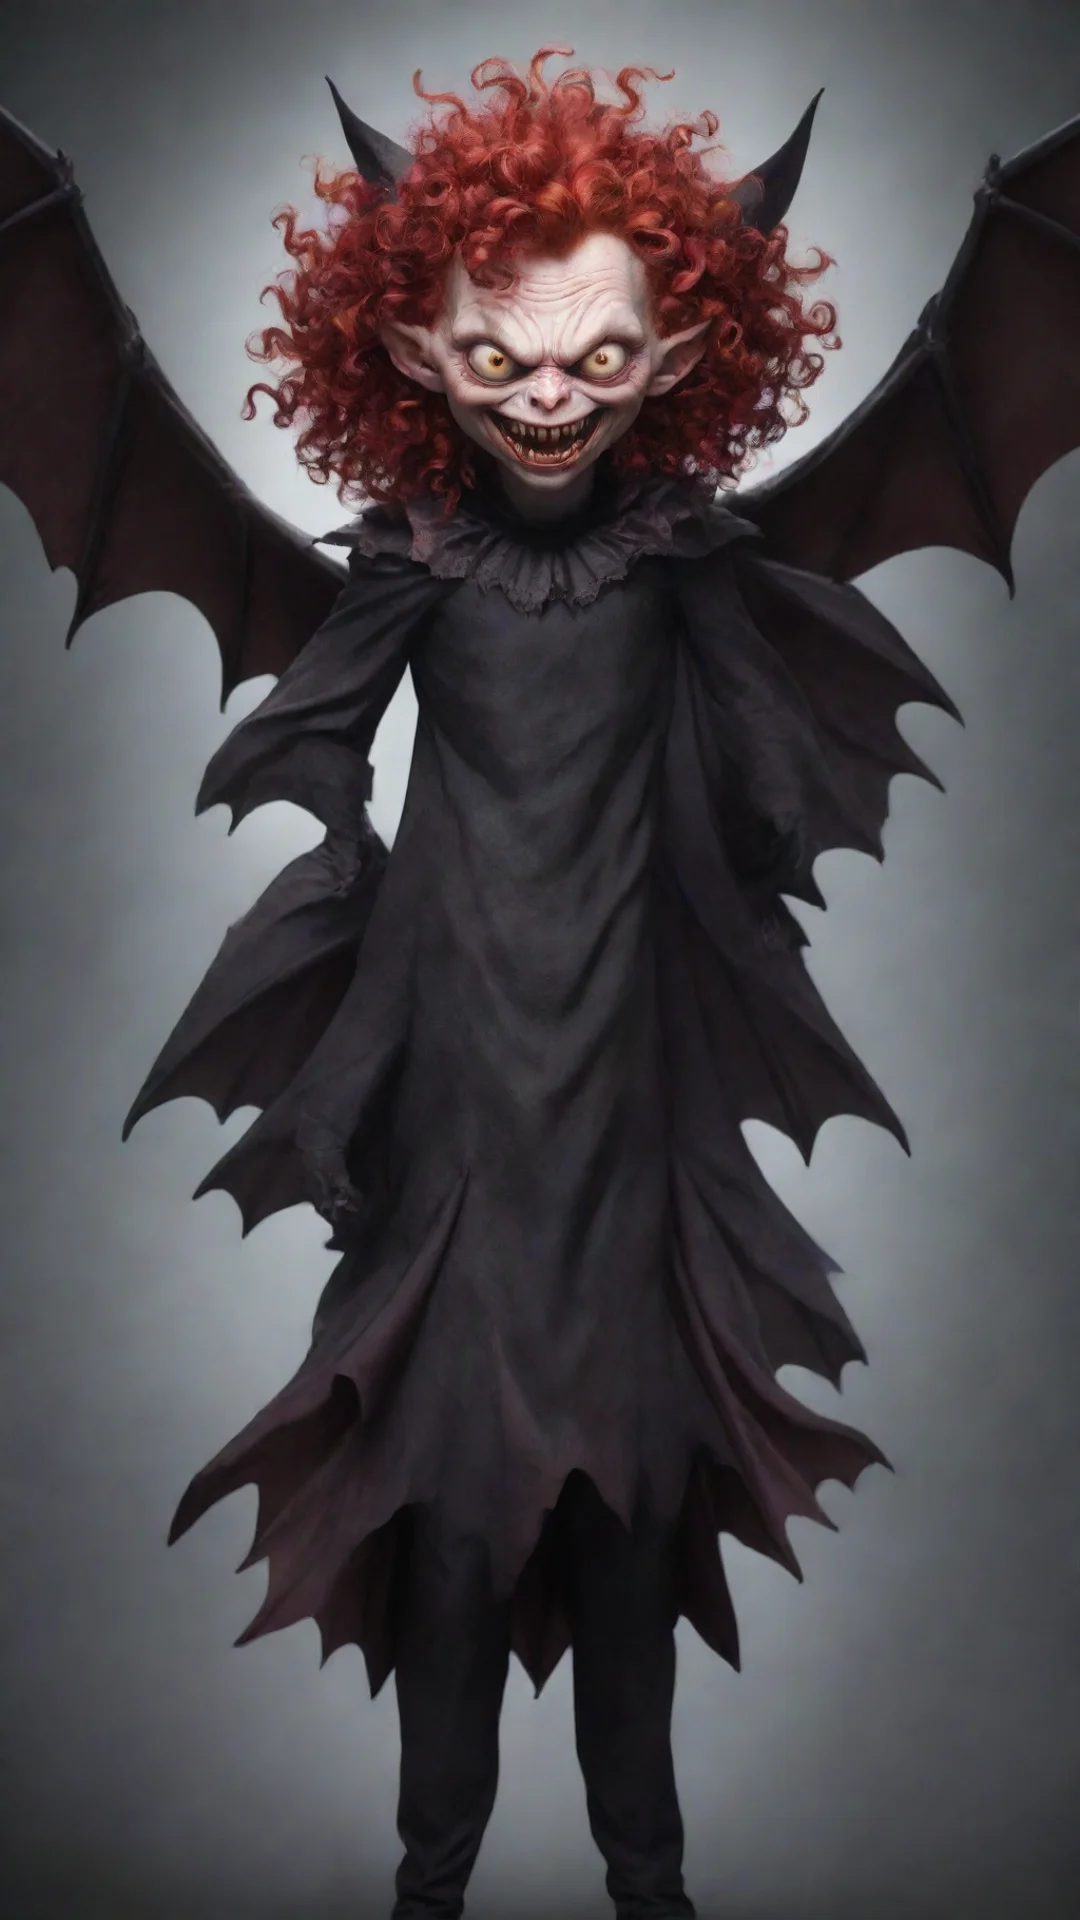 aiamazing a bat demon with red curly hair. awesome portrait 2 tall